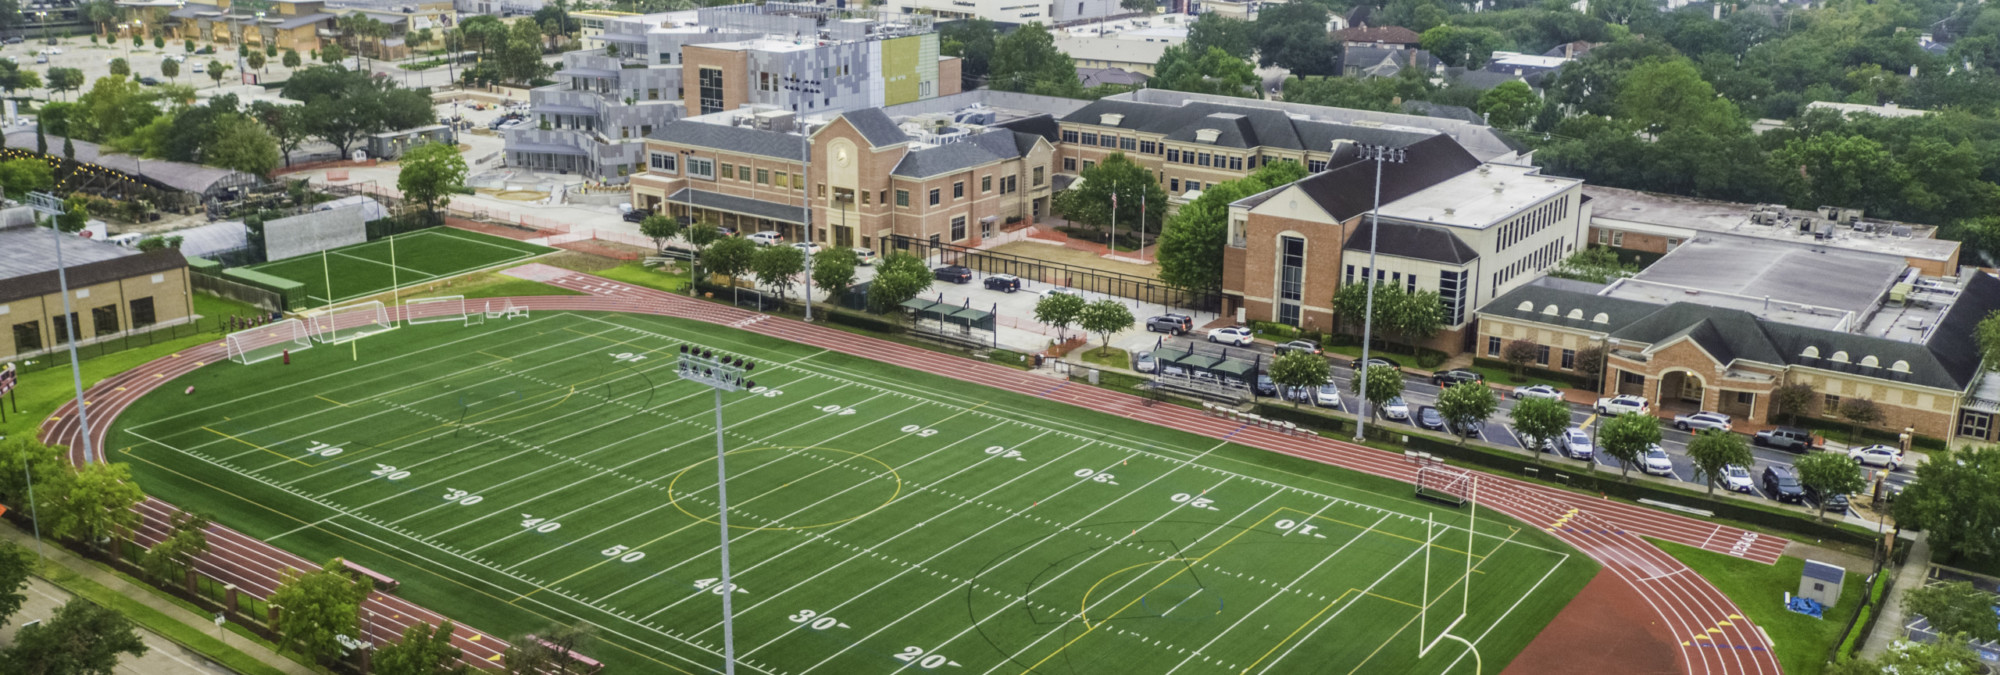 An aerial view of a football field at River Oaks Baptist School